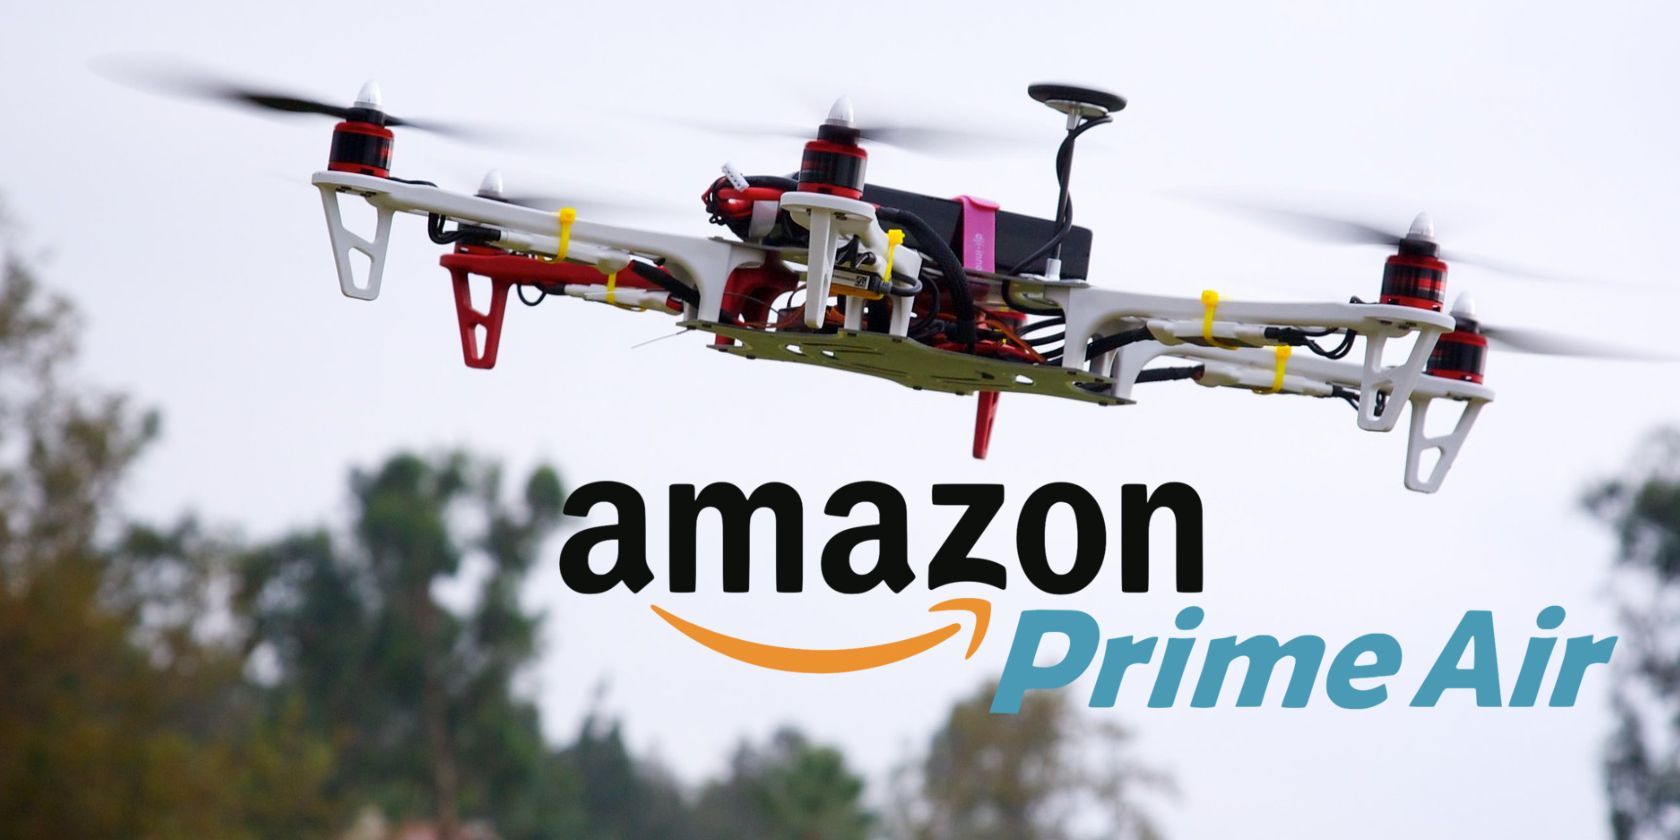 Umeki announcer Neuropati How Amazon Plans to Start Prime Air Drone Deliveries in 2022